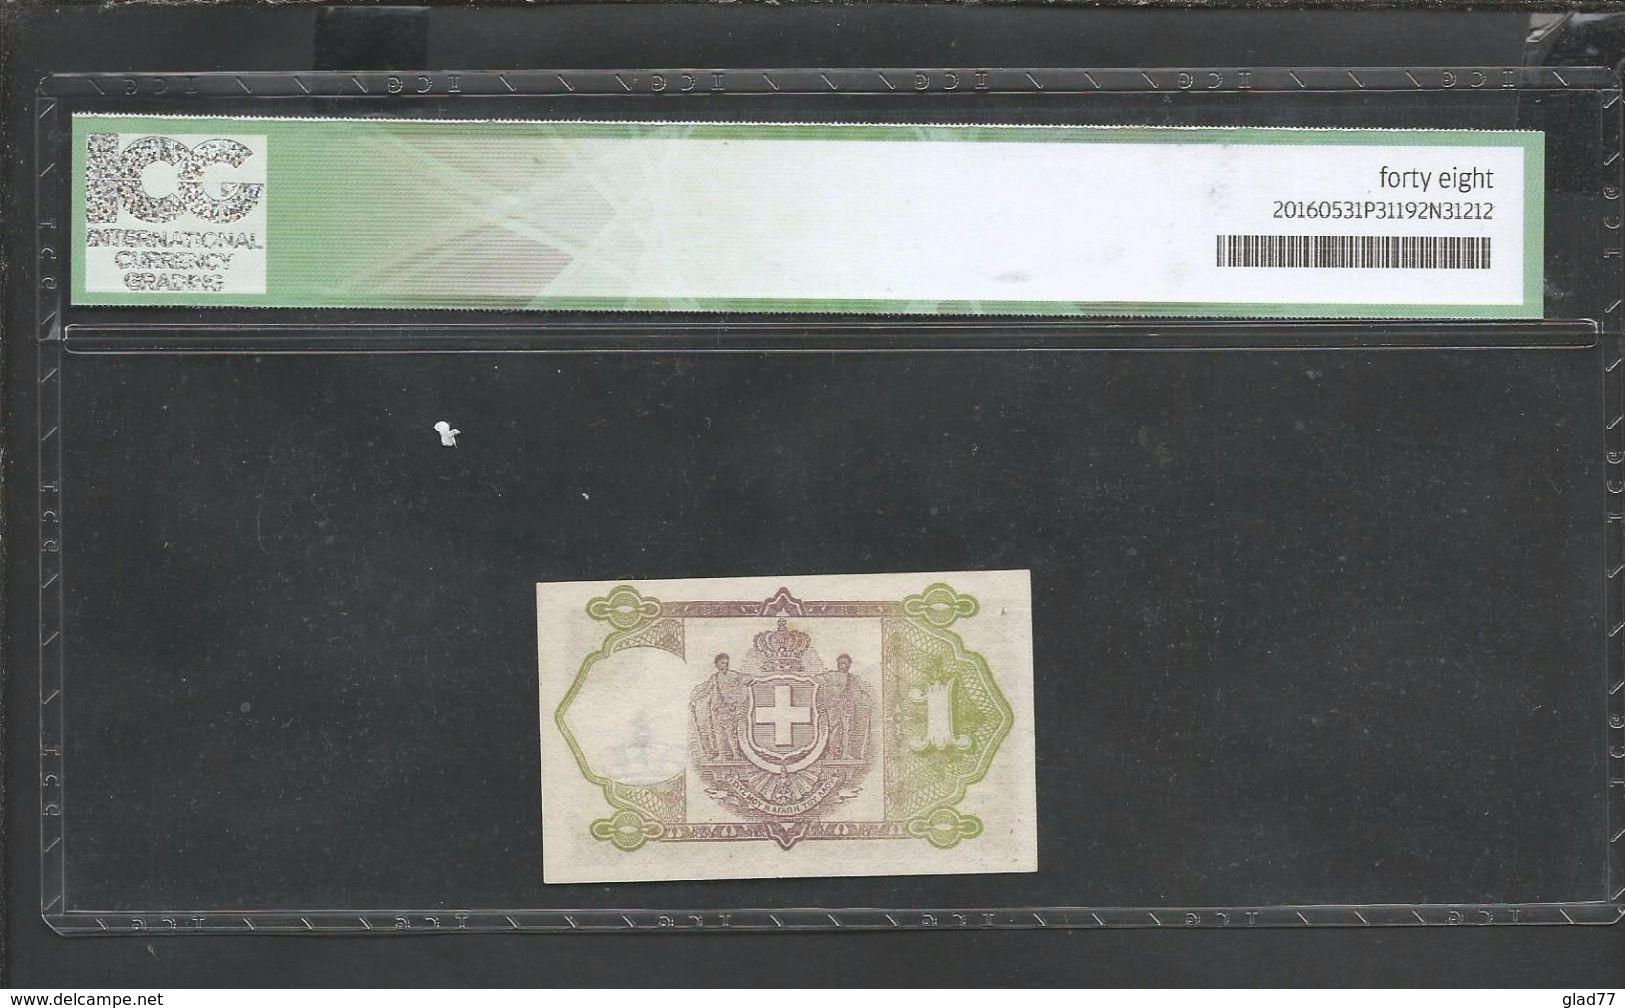 Drachmae  1/27.10.1917  "Homer"!   ICG 48 EXTRA FINE+! (My Opinion At Least AUNC) - Griekenland